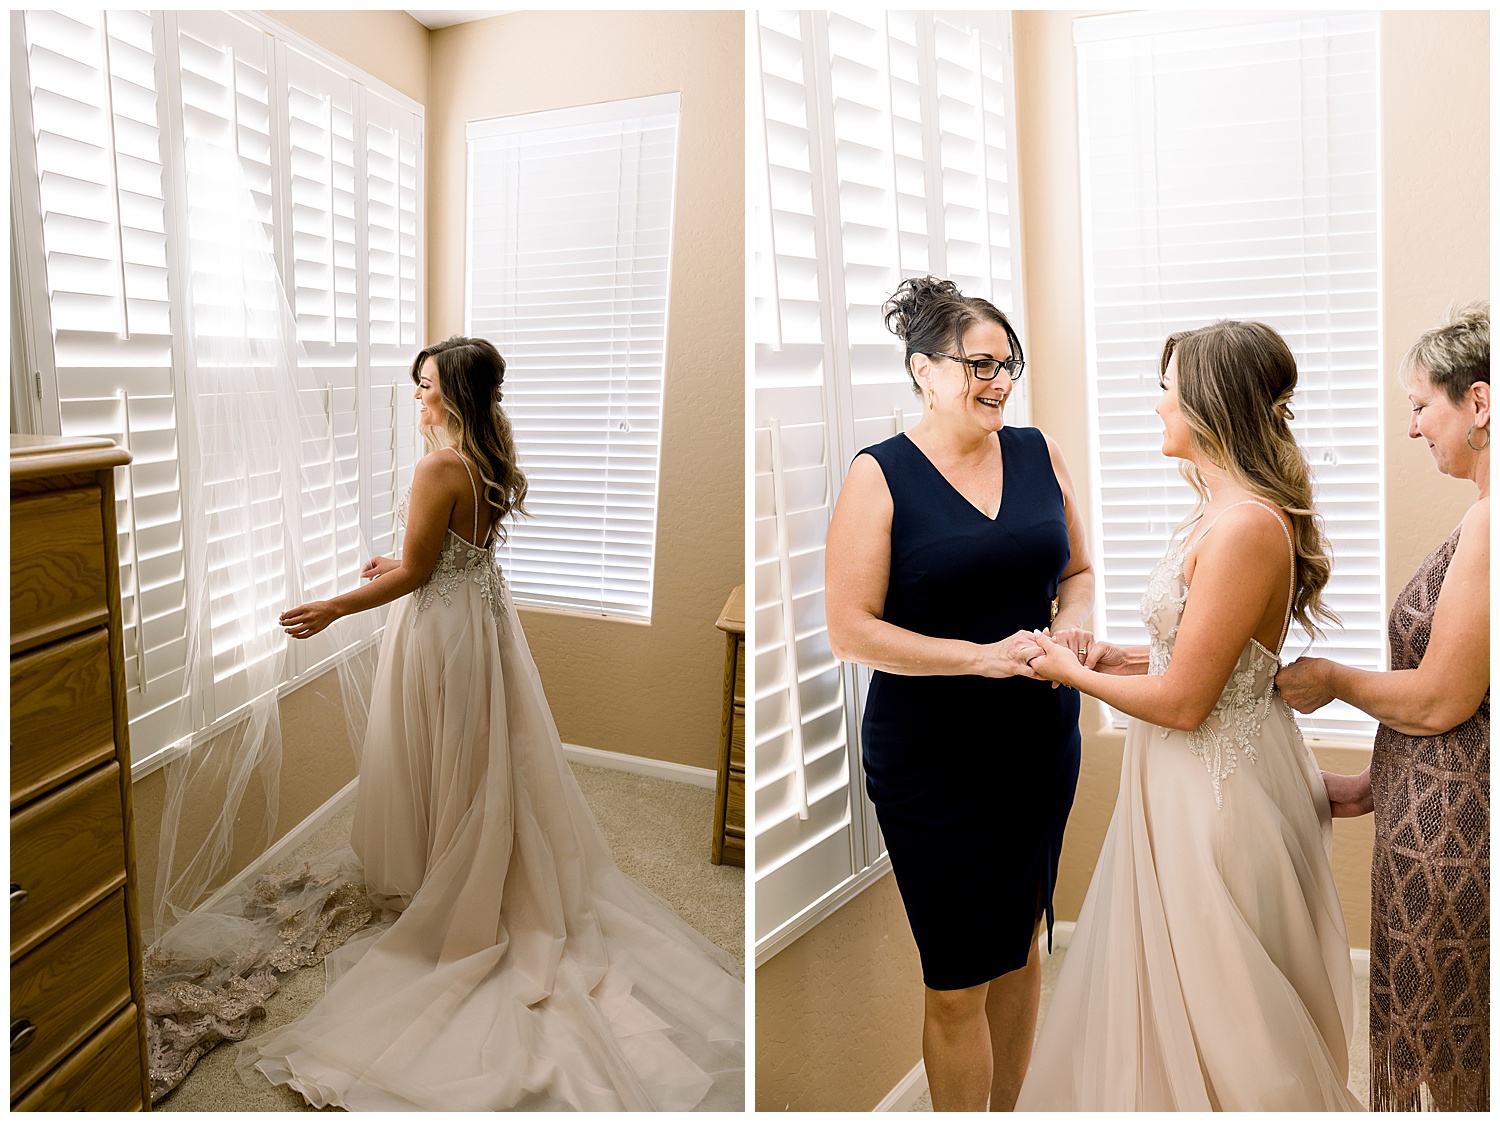 Mother and mother of the groom helping bride into her dress. Bride looking at her veil, estate wedding in Arizona